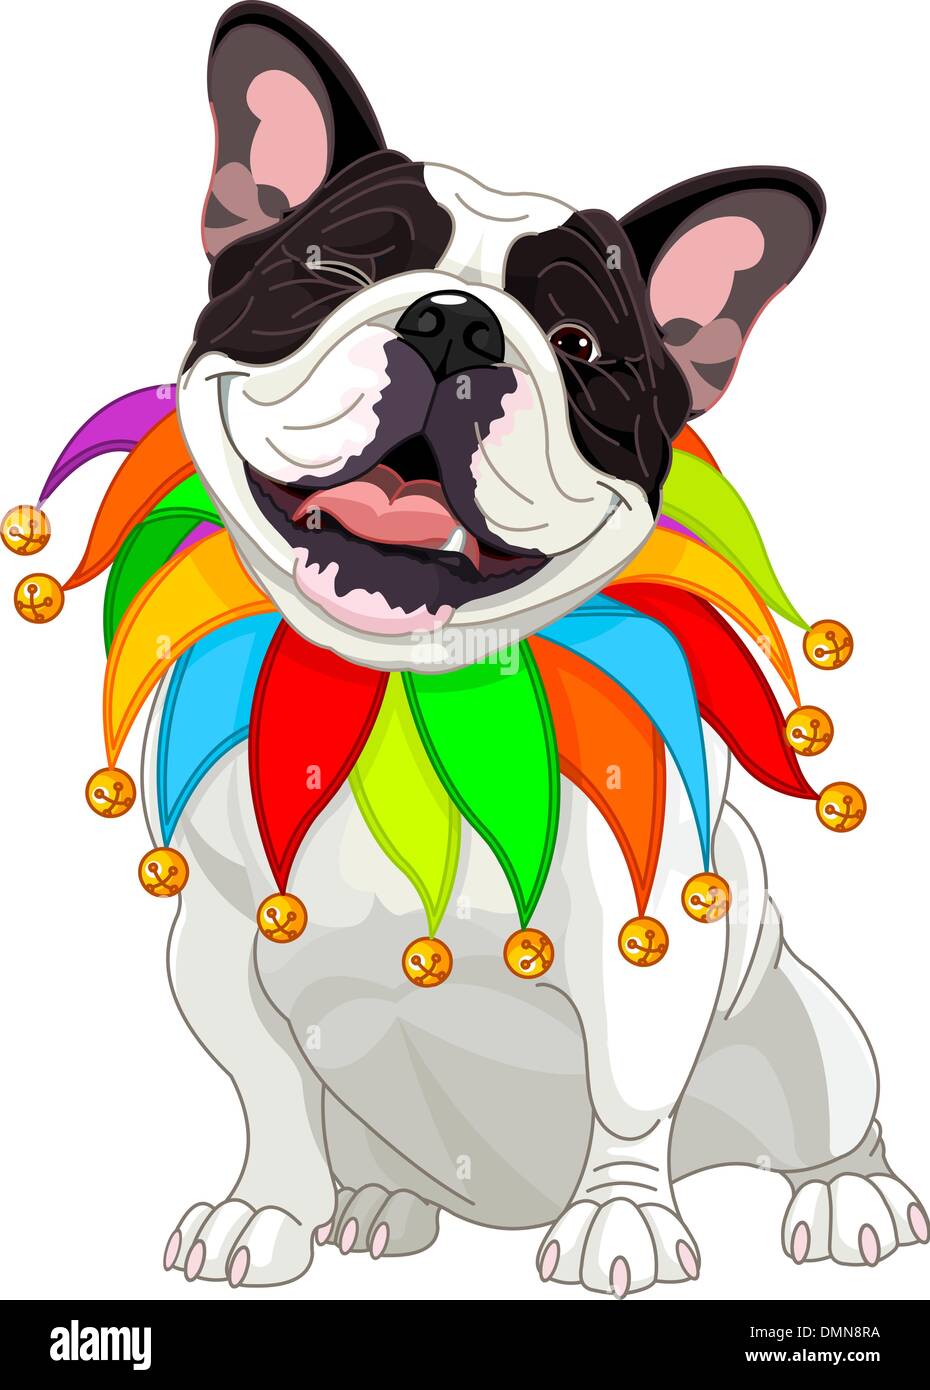 French bulldog wearing a colorful collar Stock Vector